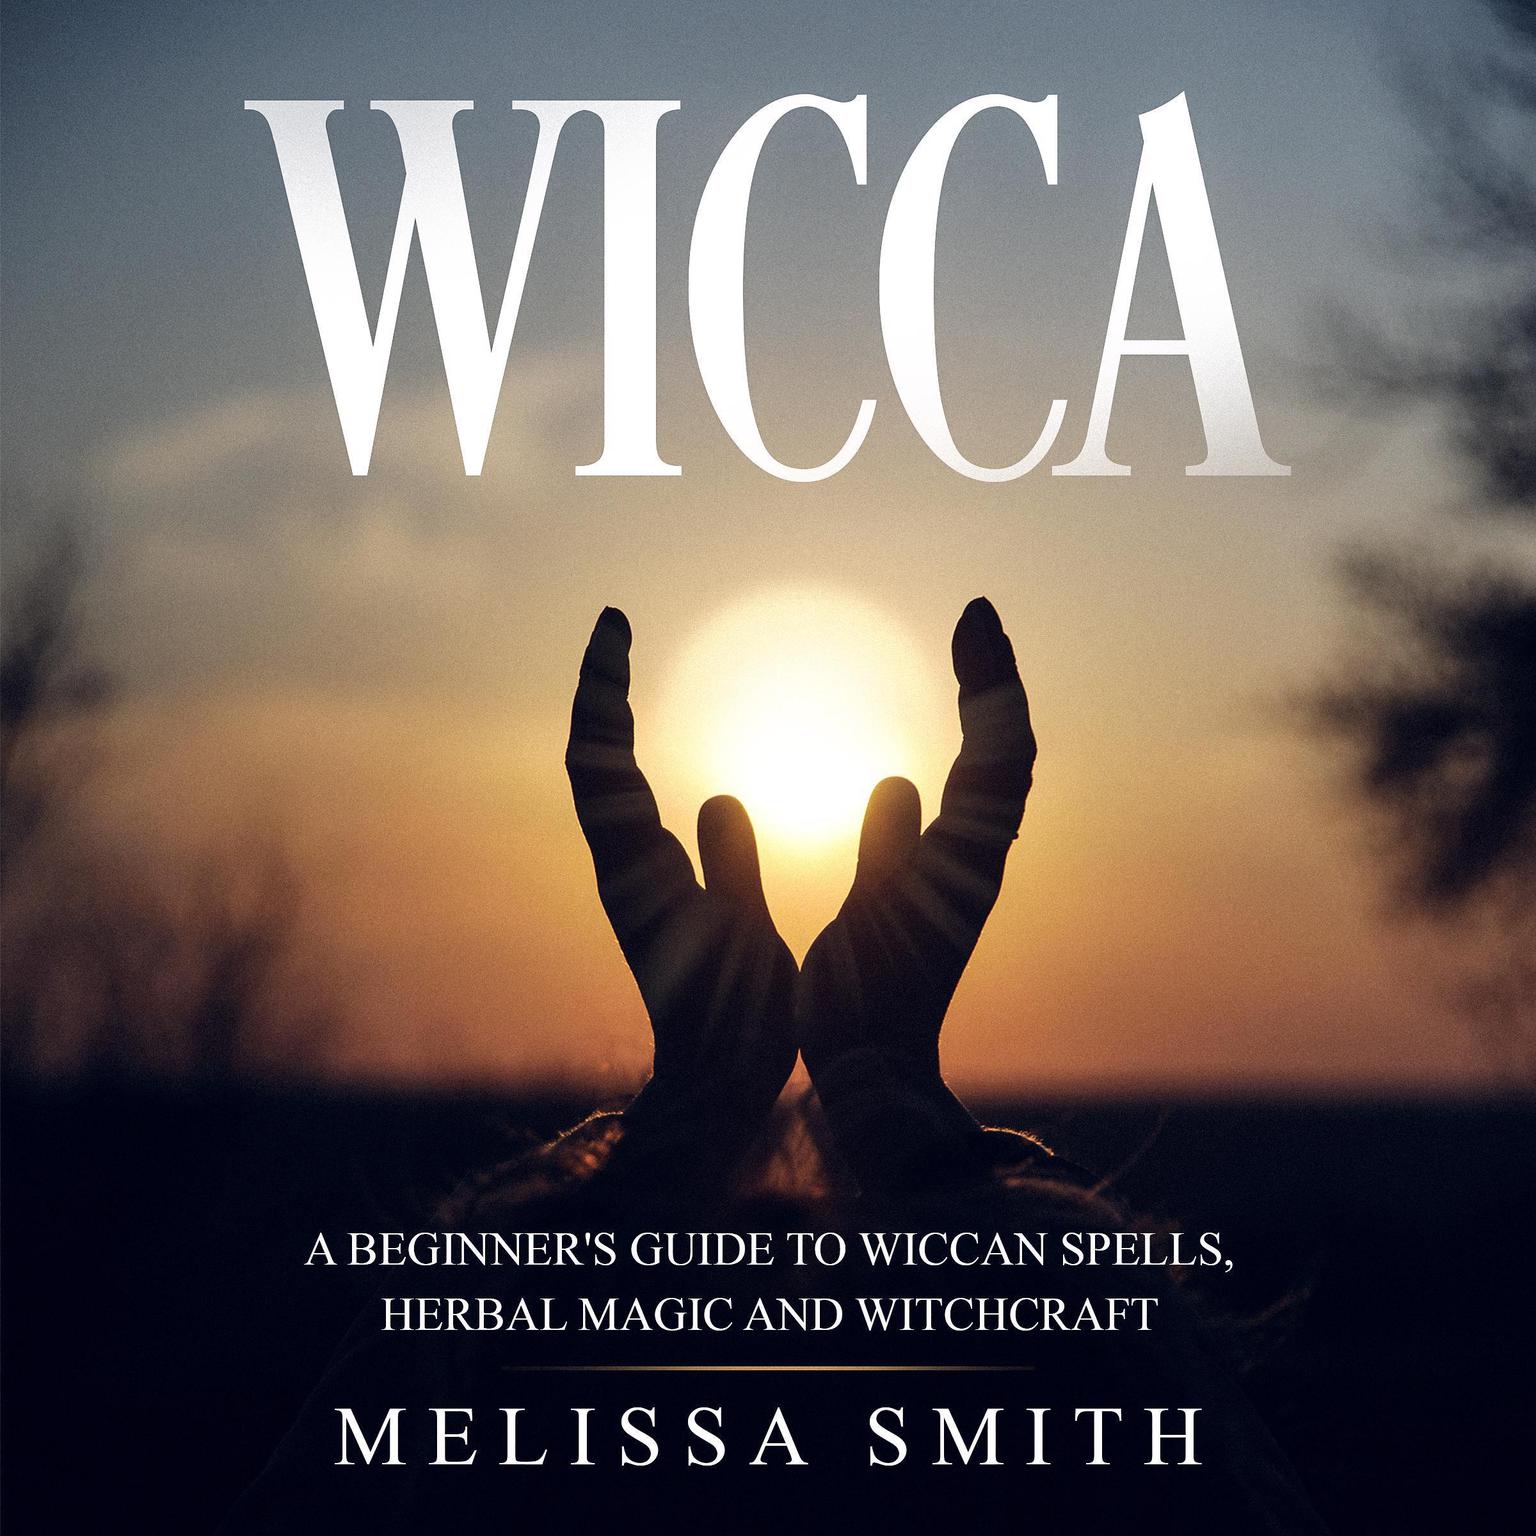 WICCA: A BEGINNERS GUIDE TO WICCAN SPELLS, HERBAL MAGIC AND WITCHCRAFT Audiobook, by Melissa Smith